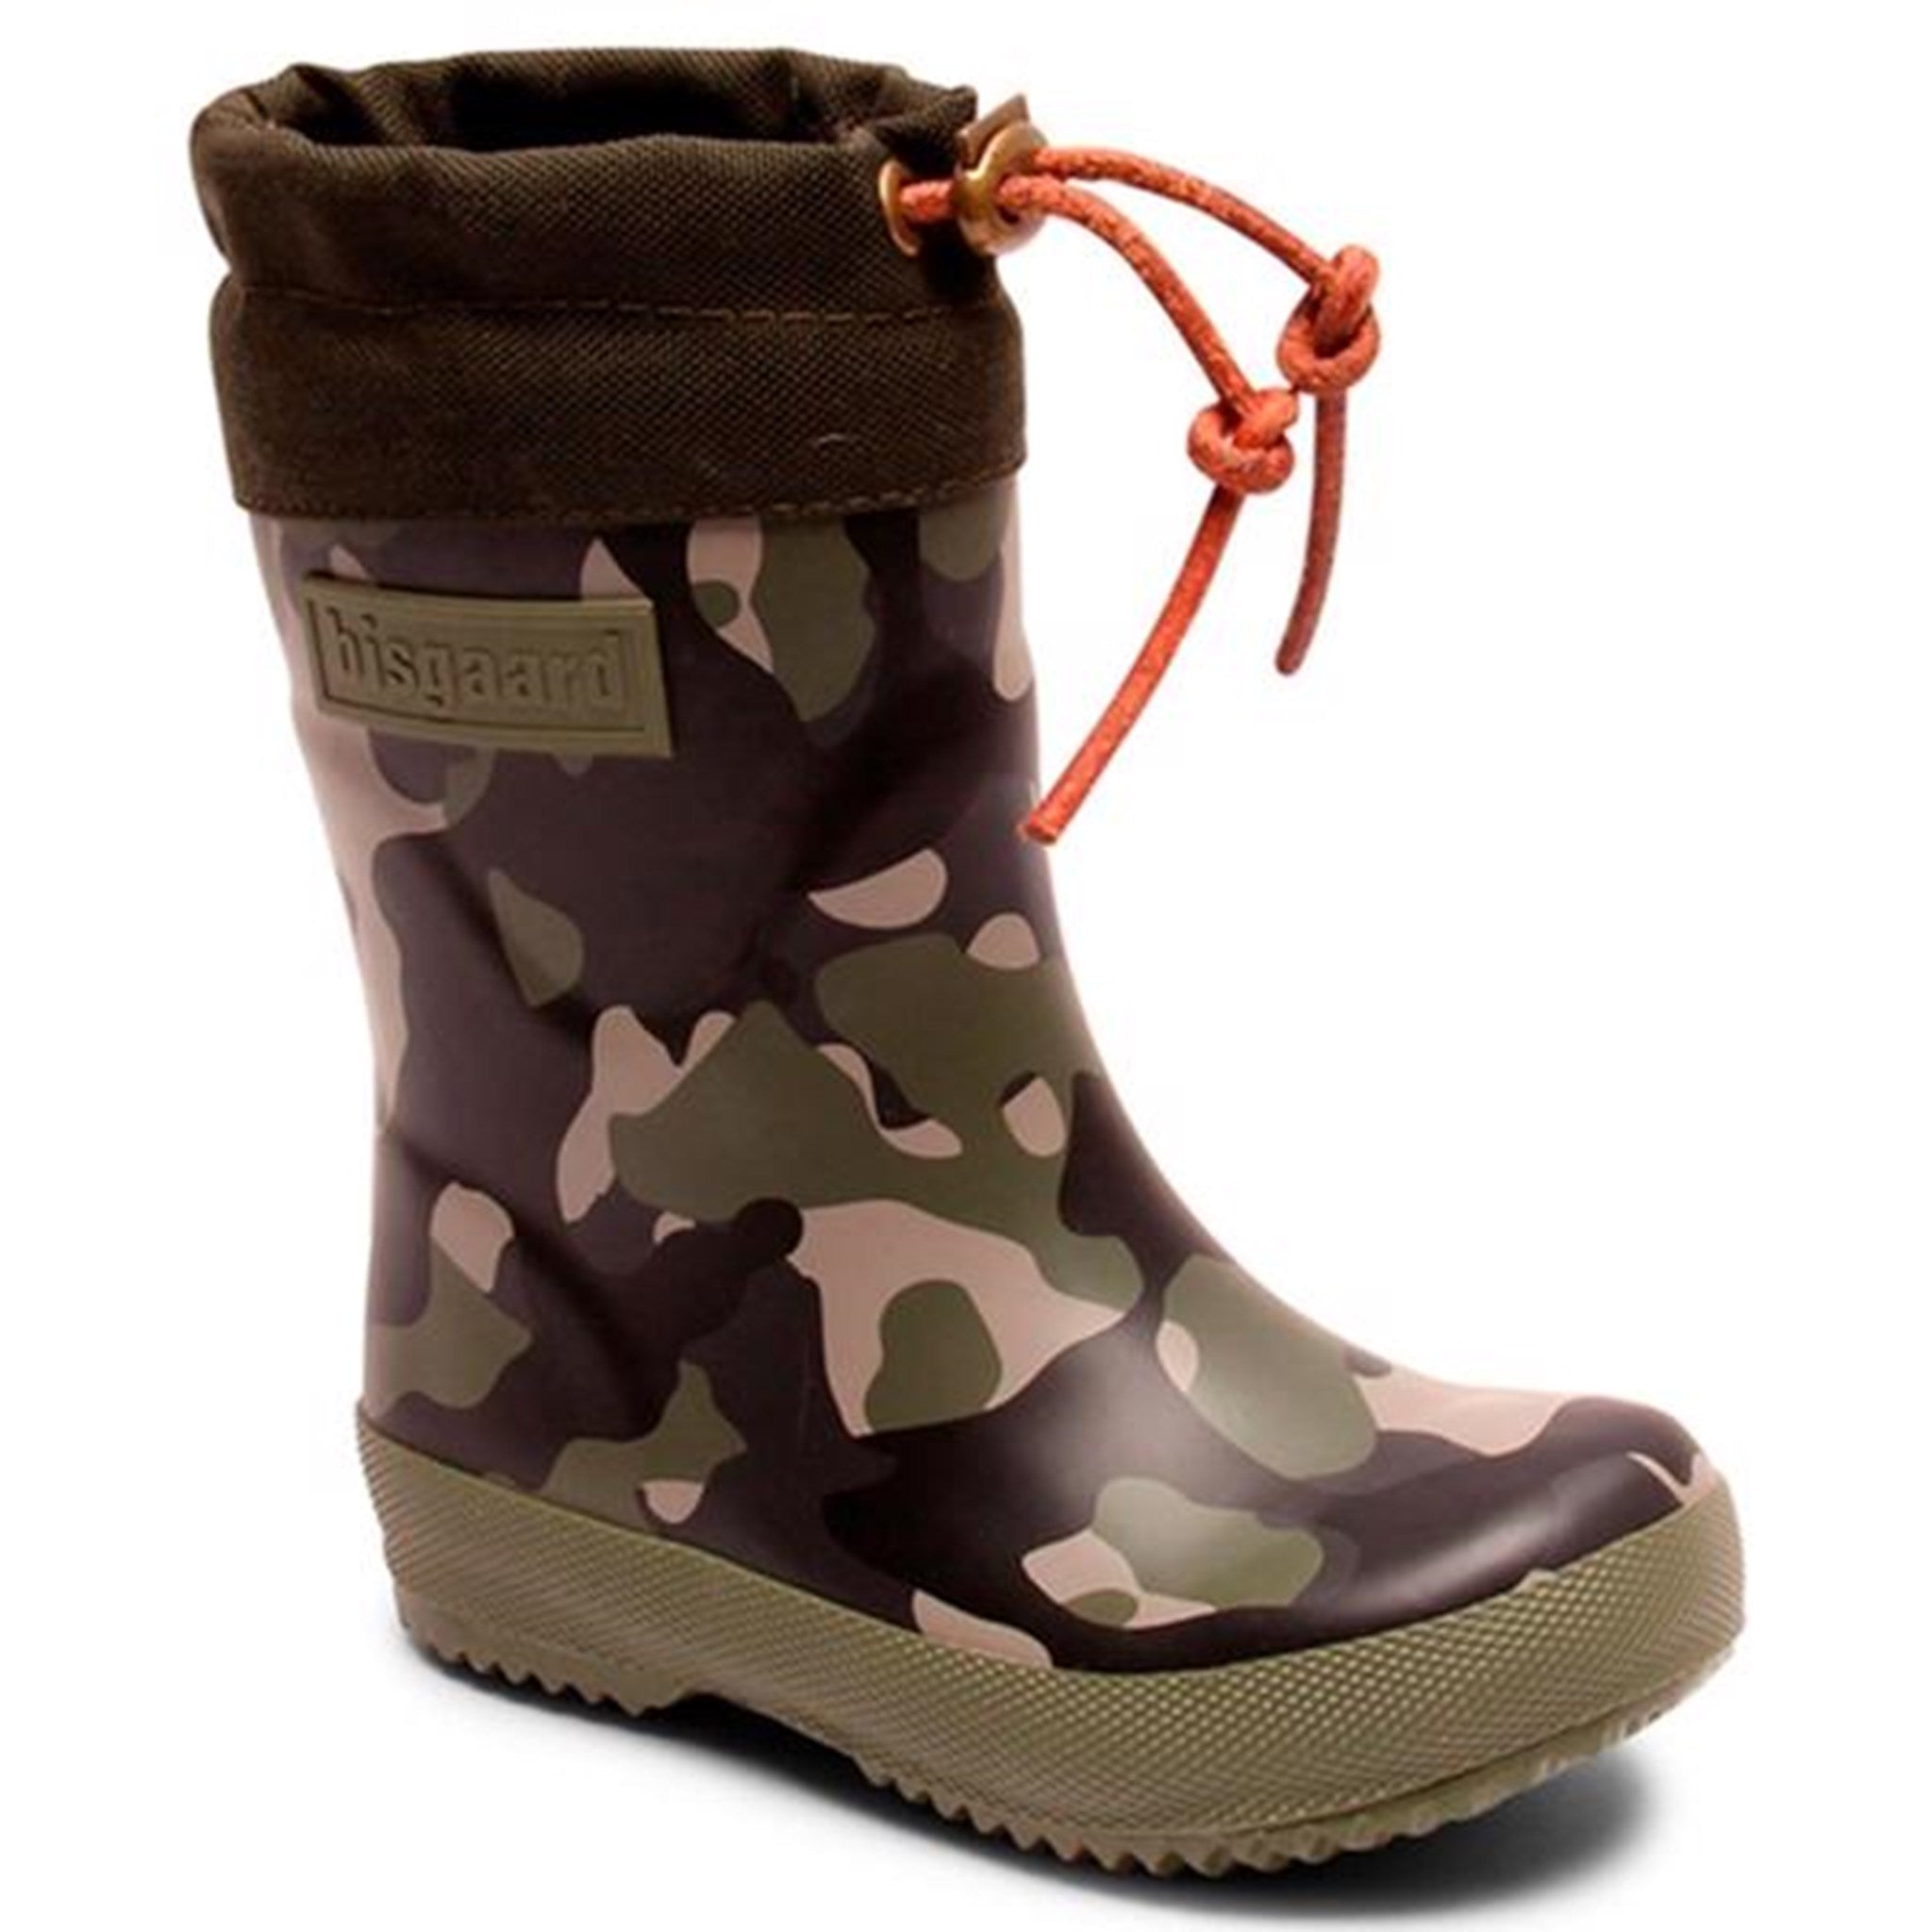 Bisgaard Limited Edition Winter Thermo Rubber Boots Camouflage